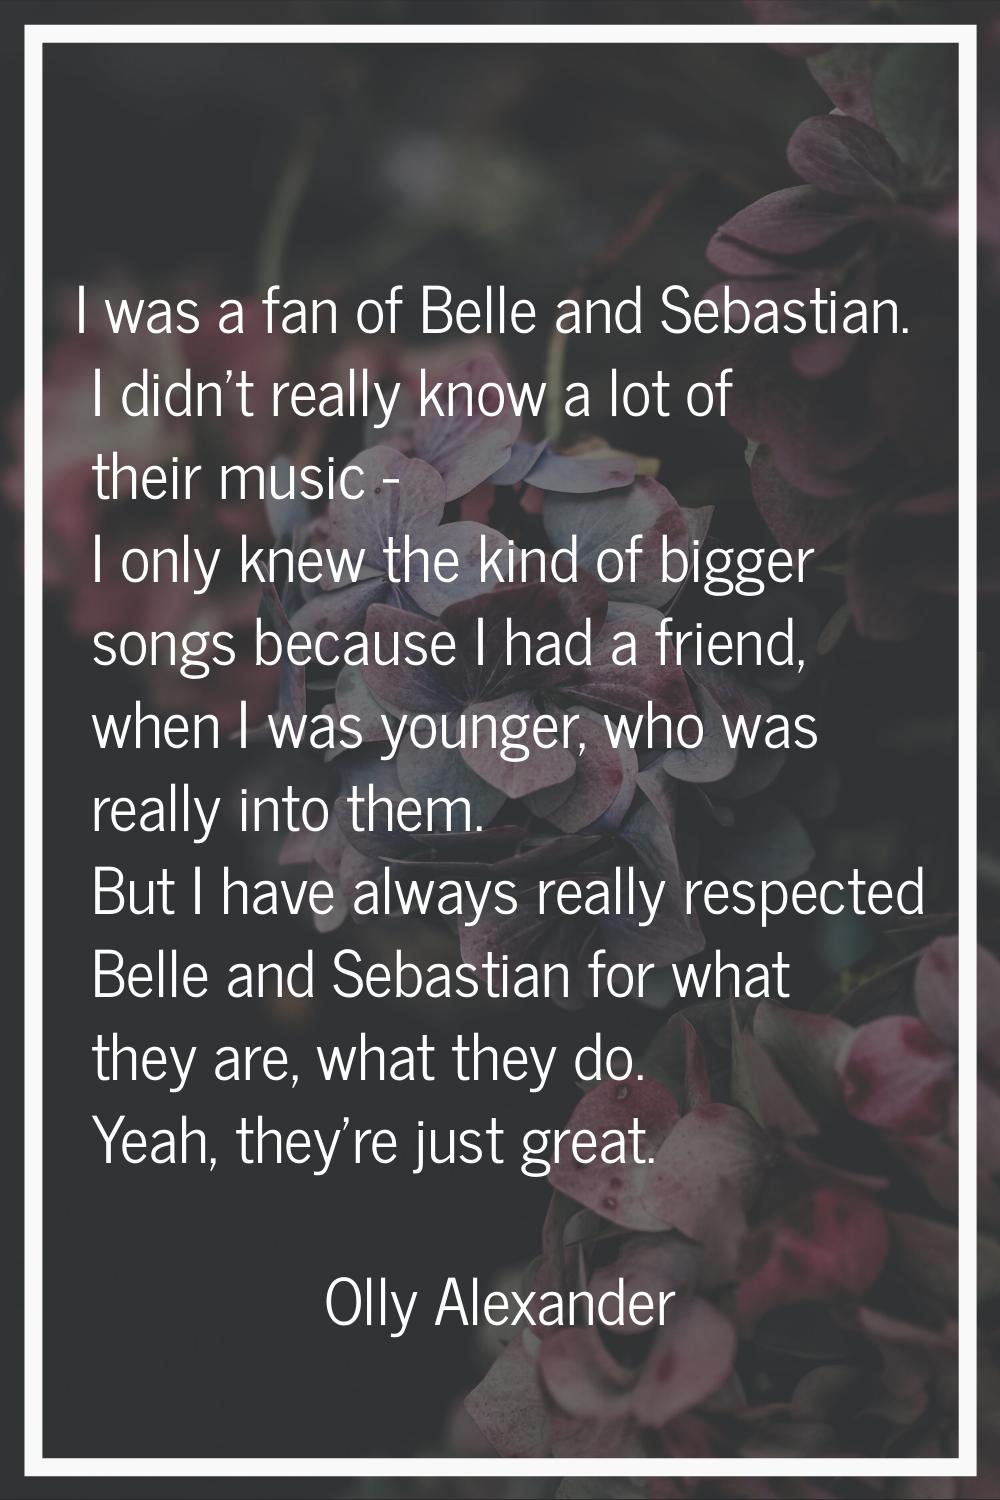 I was a fan of Belle and Sebastian. I didn't really know a lot of their music - I only knew the kin